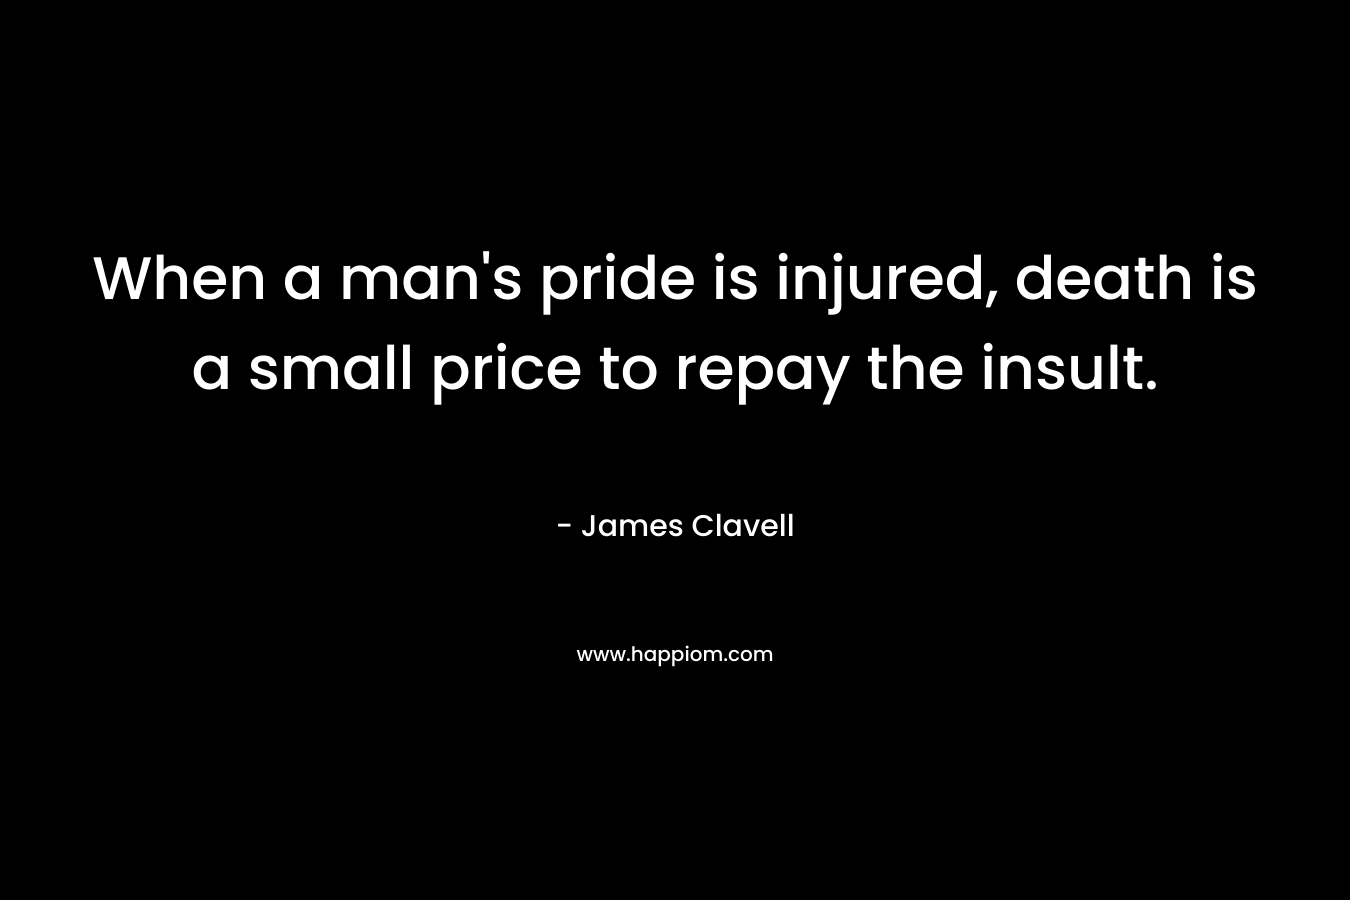 When a man's pride is injured, death is a small price to repay the insult.